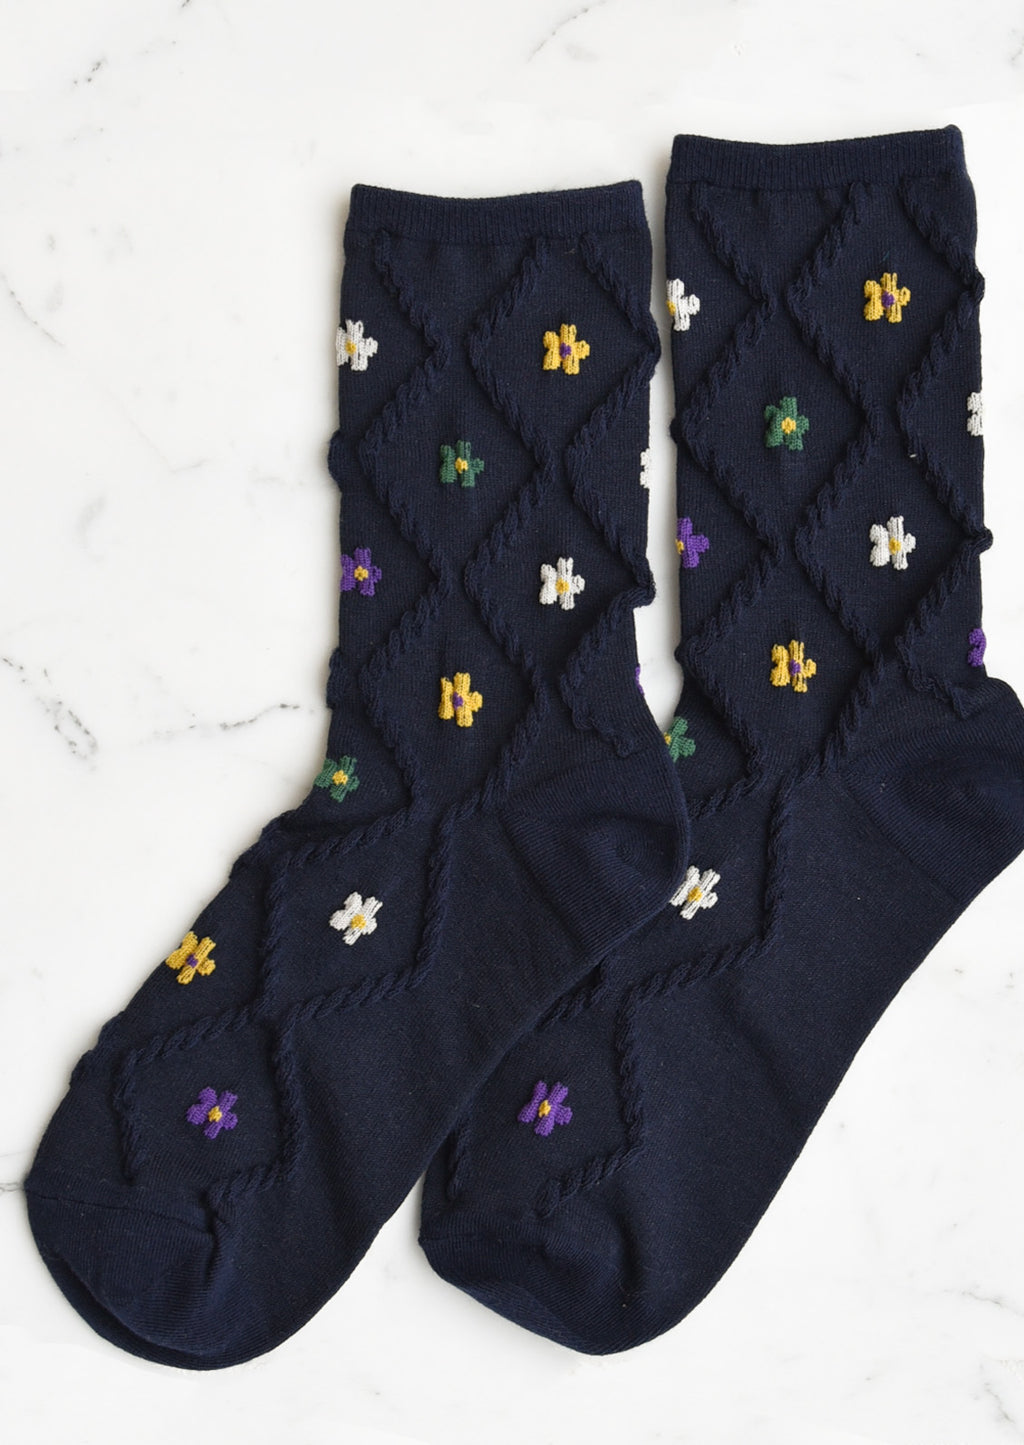 Navy Multi: A pair of navy socks with diamond pattern and florals.